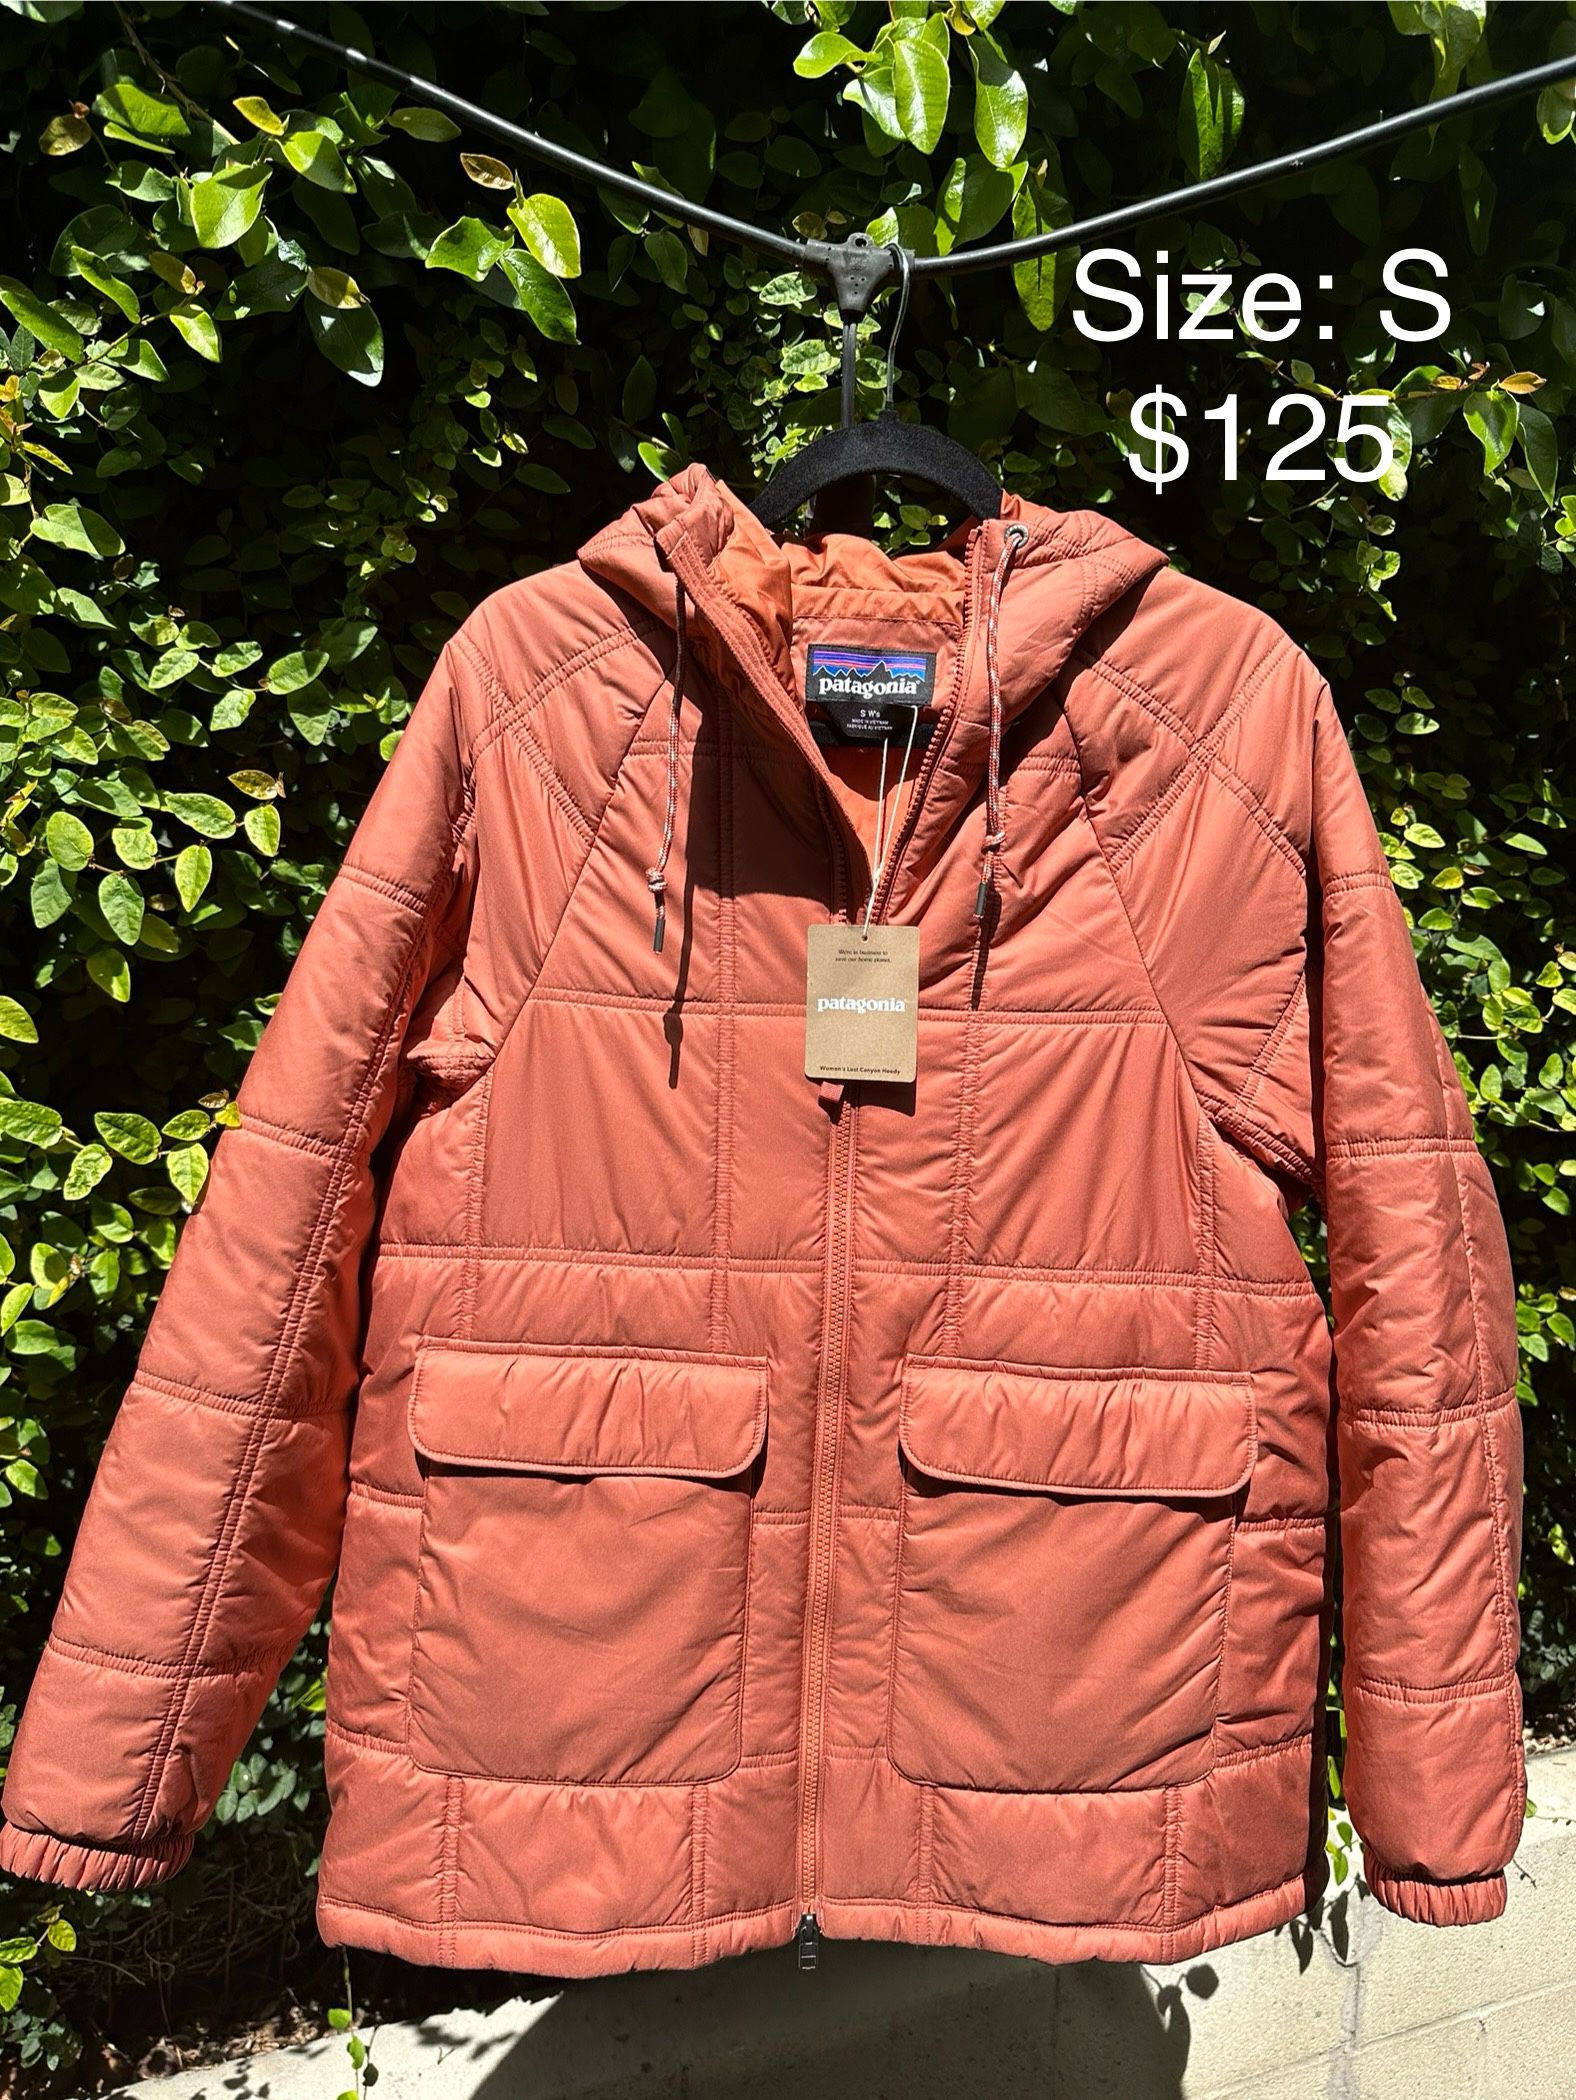 NEW: Patagonia Women’s Lost Canyon Jacket Size: S